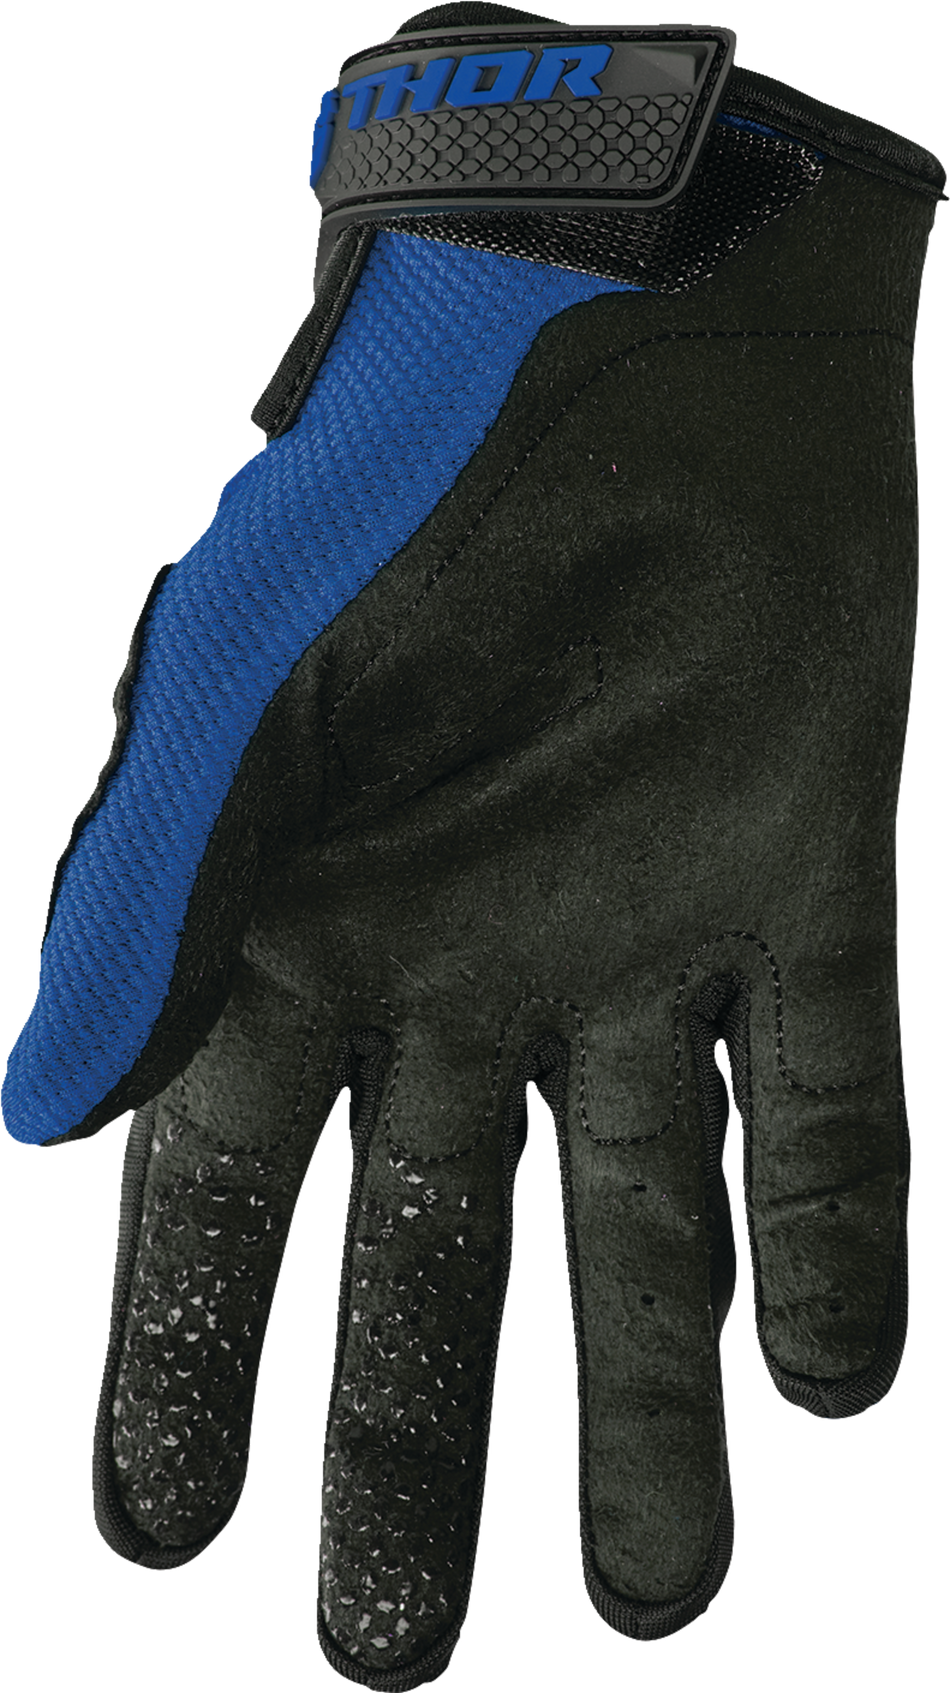 THOR Sector Gloves - Navy/White - Small 3330-7262